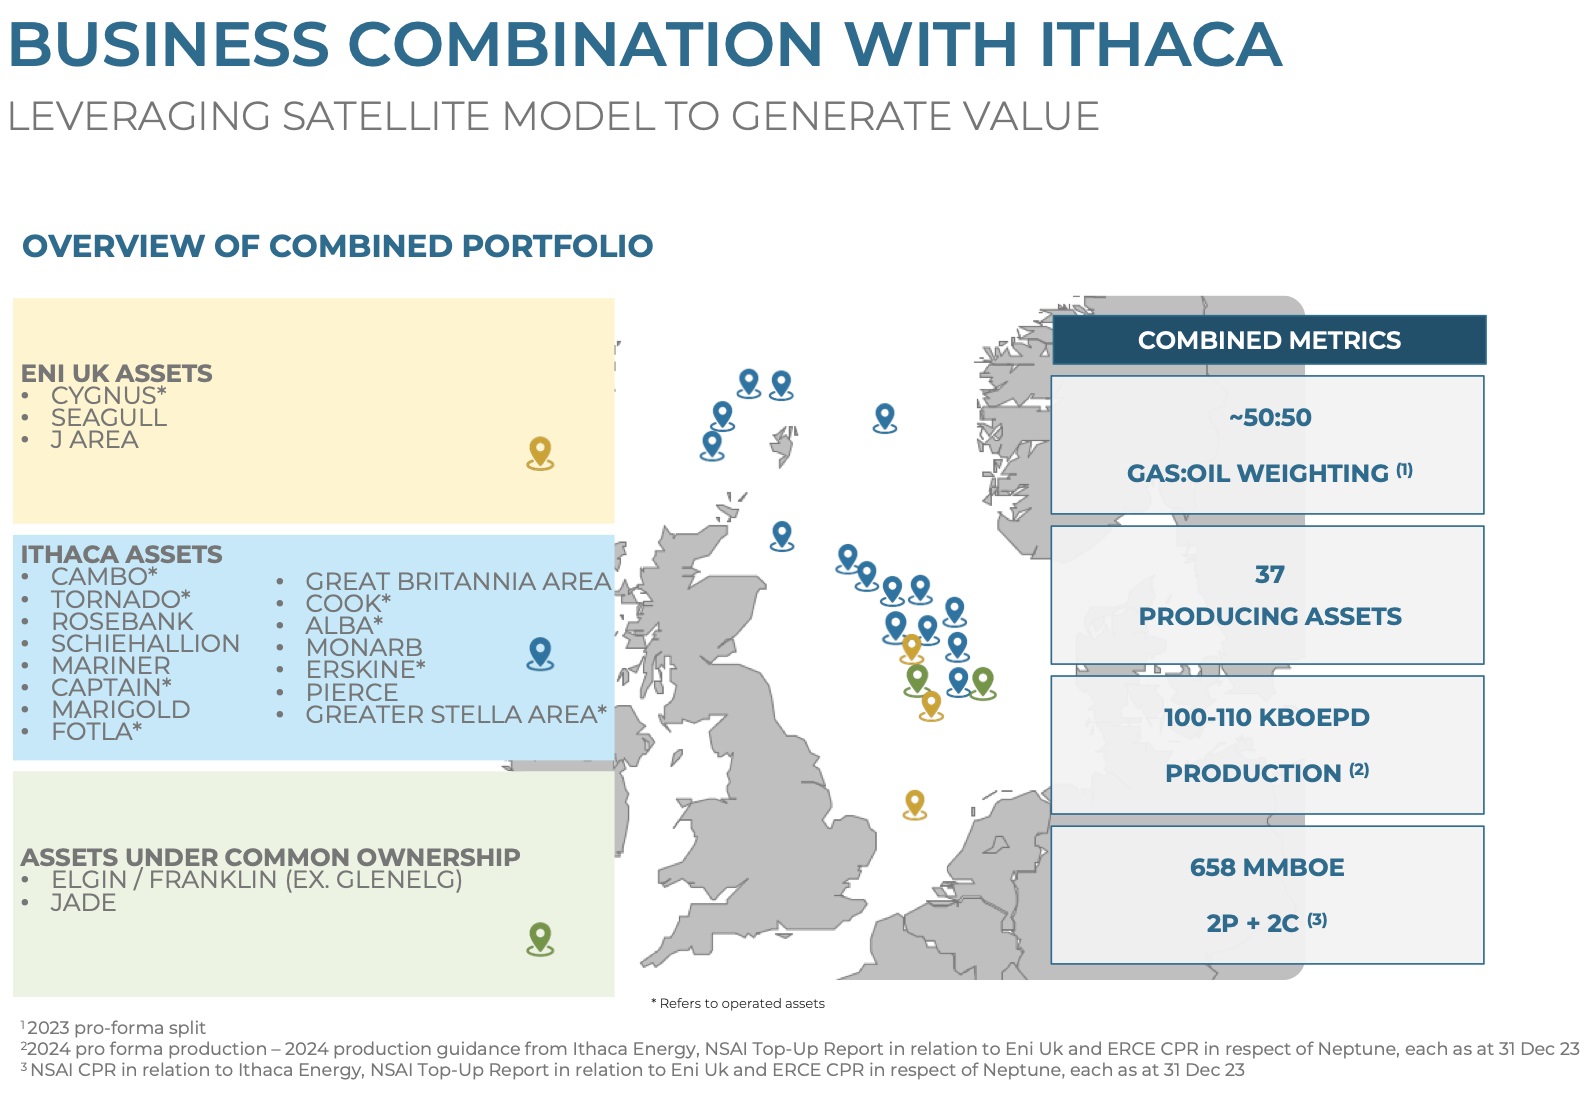 Ithaca Deal ‘Ticks All the Boxes,’ Eni’s CFO Says